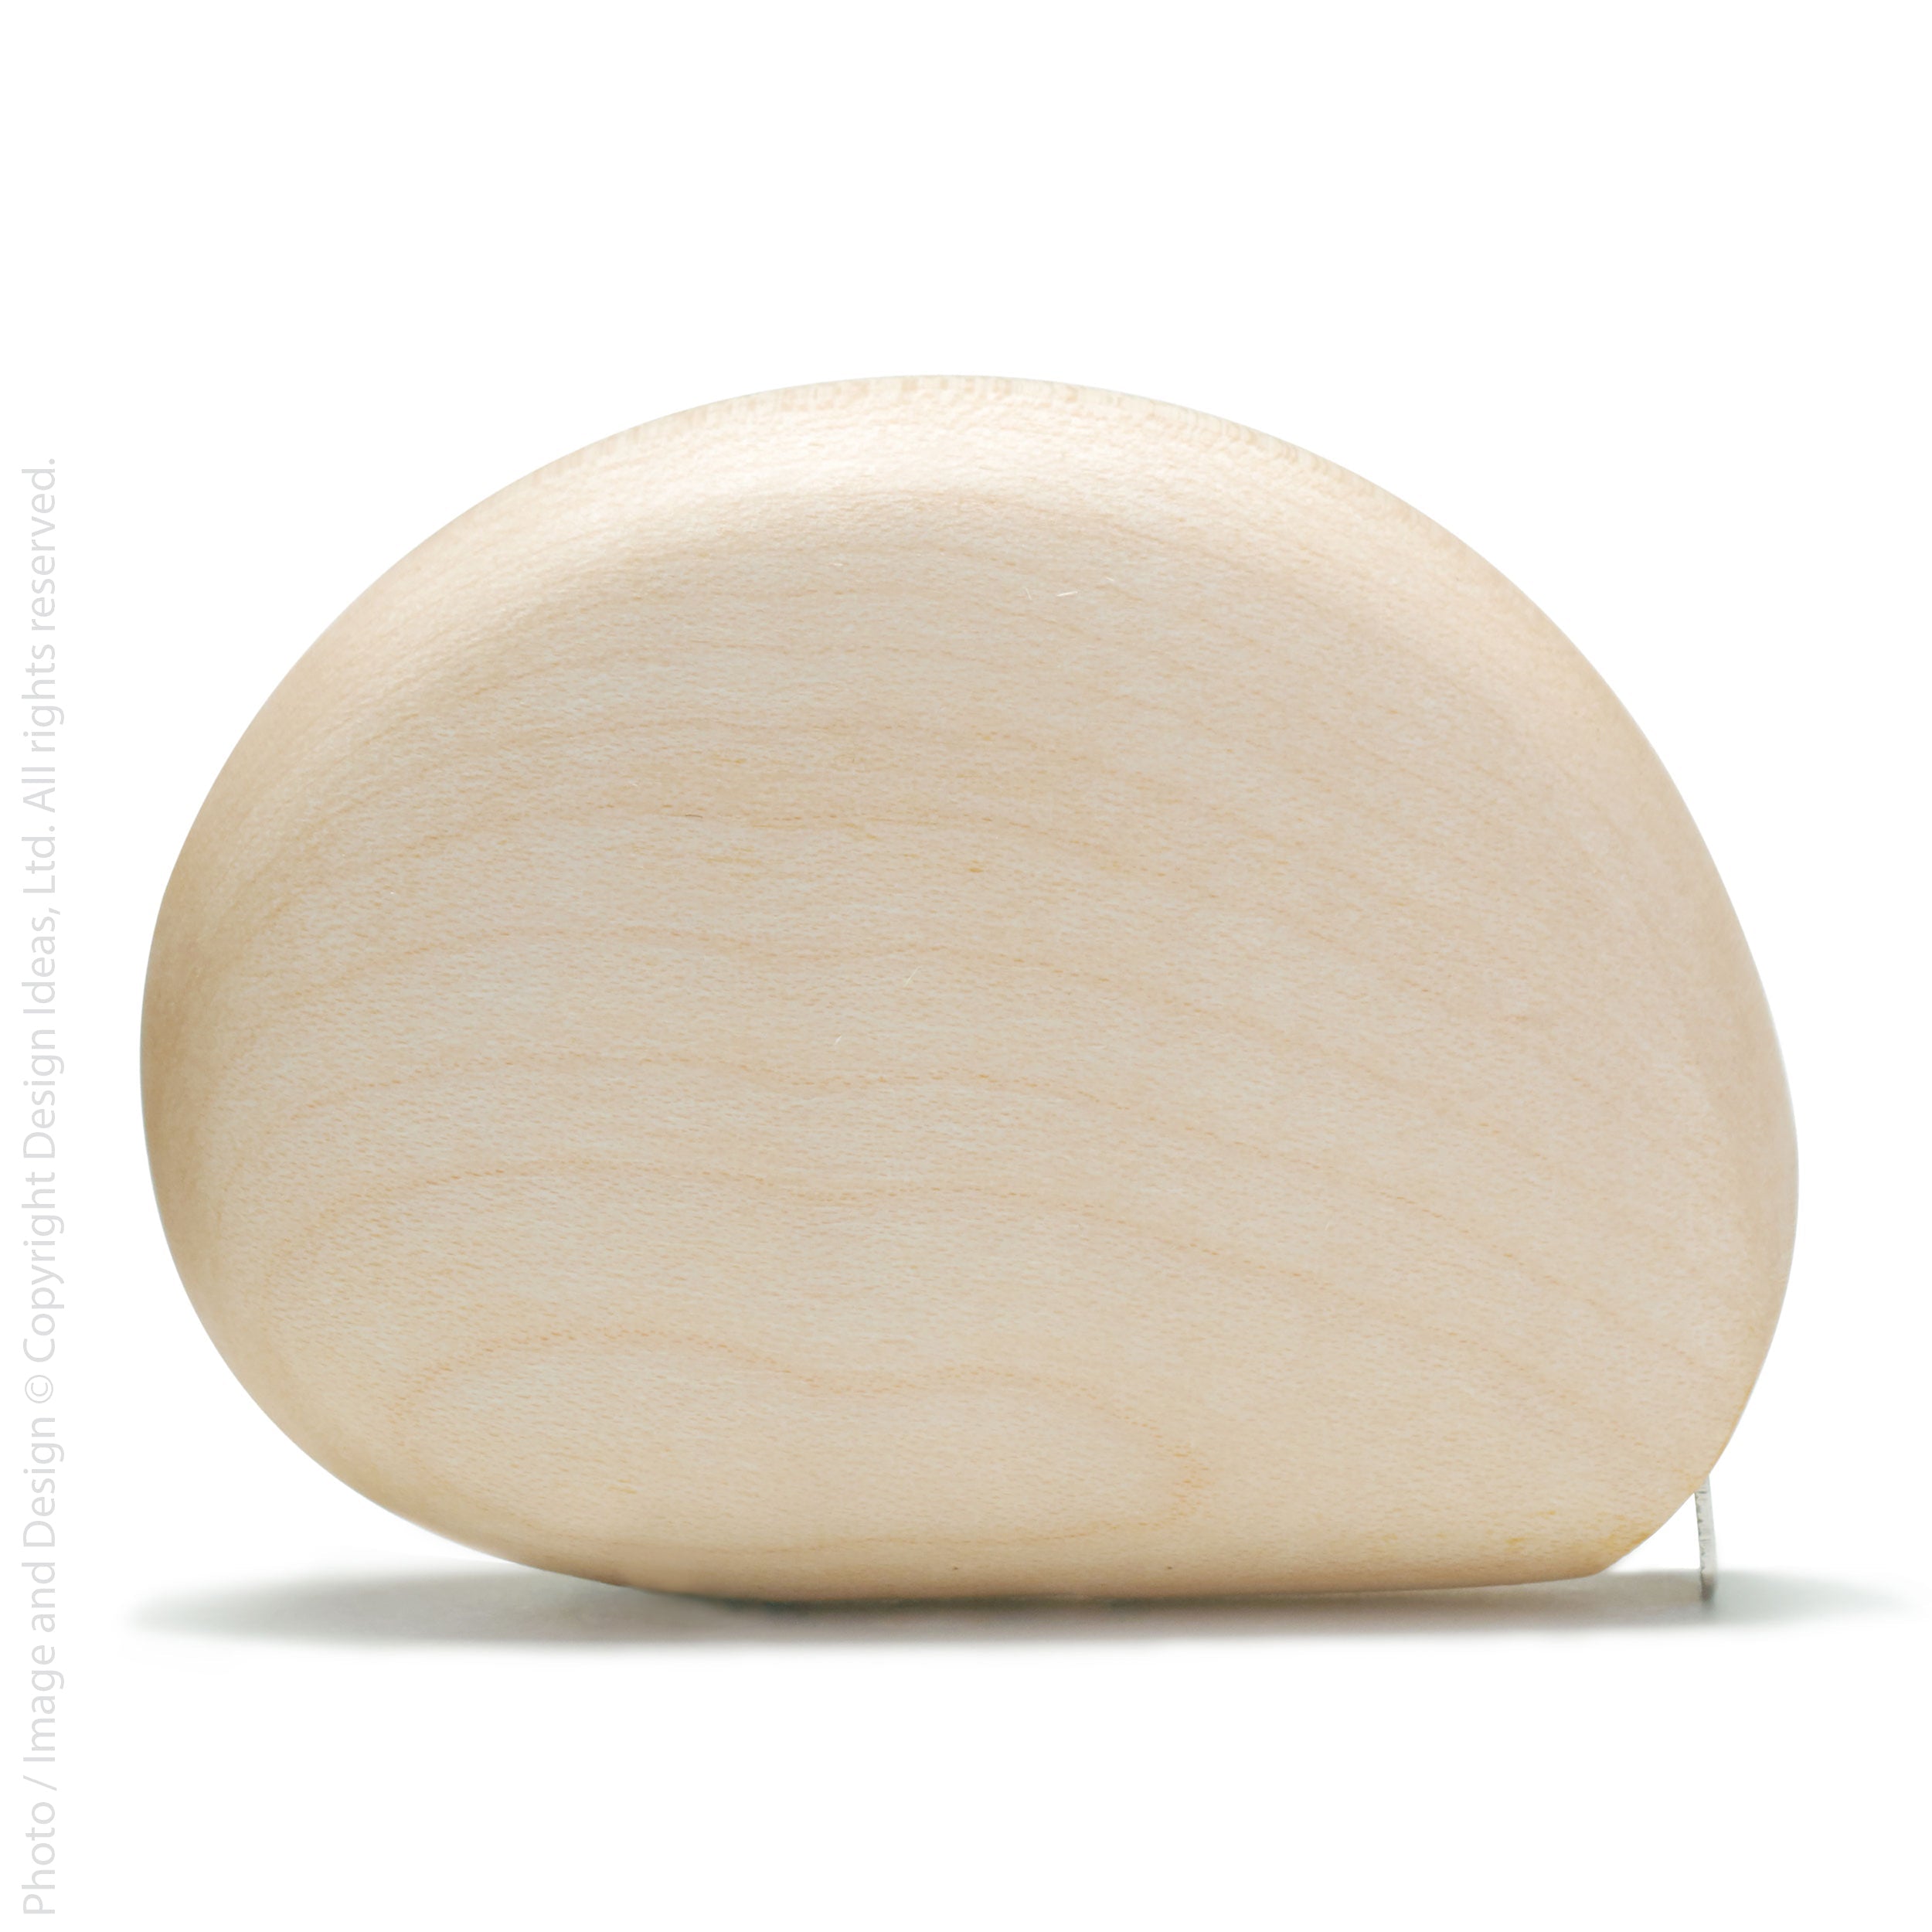 Upland Sycamore Tape Measure Natural Color | Image 5 | From the Upland Collection | Masterfully created with natural sycamore for long lasting use | Available in natural color | texxture home